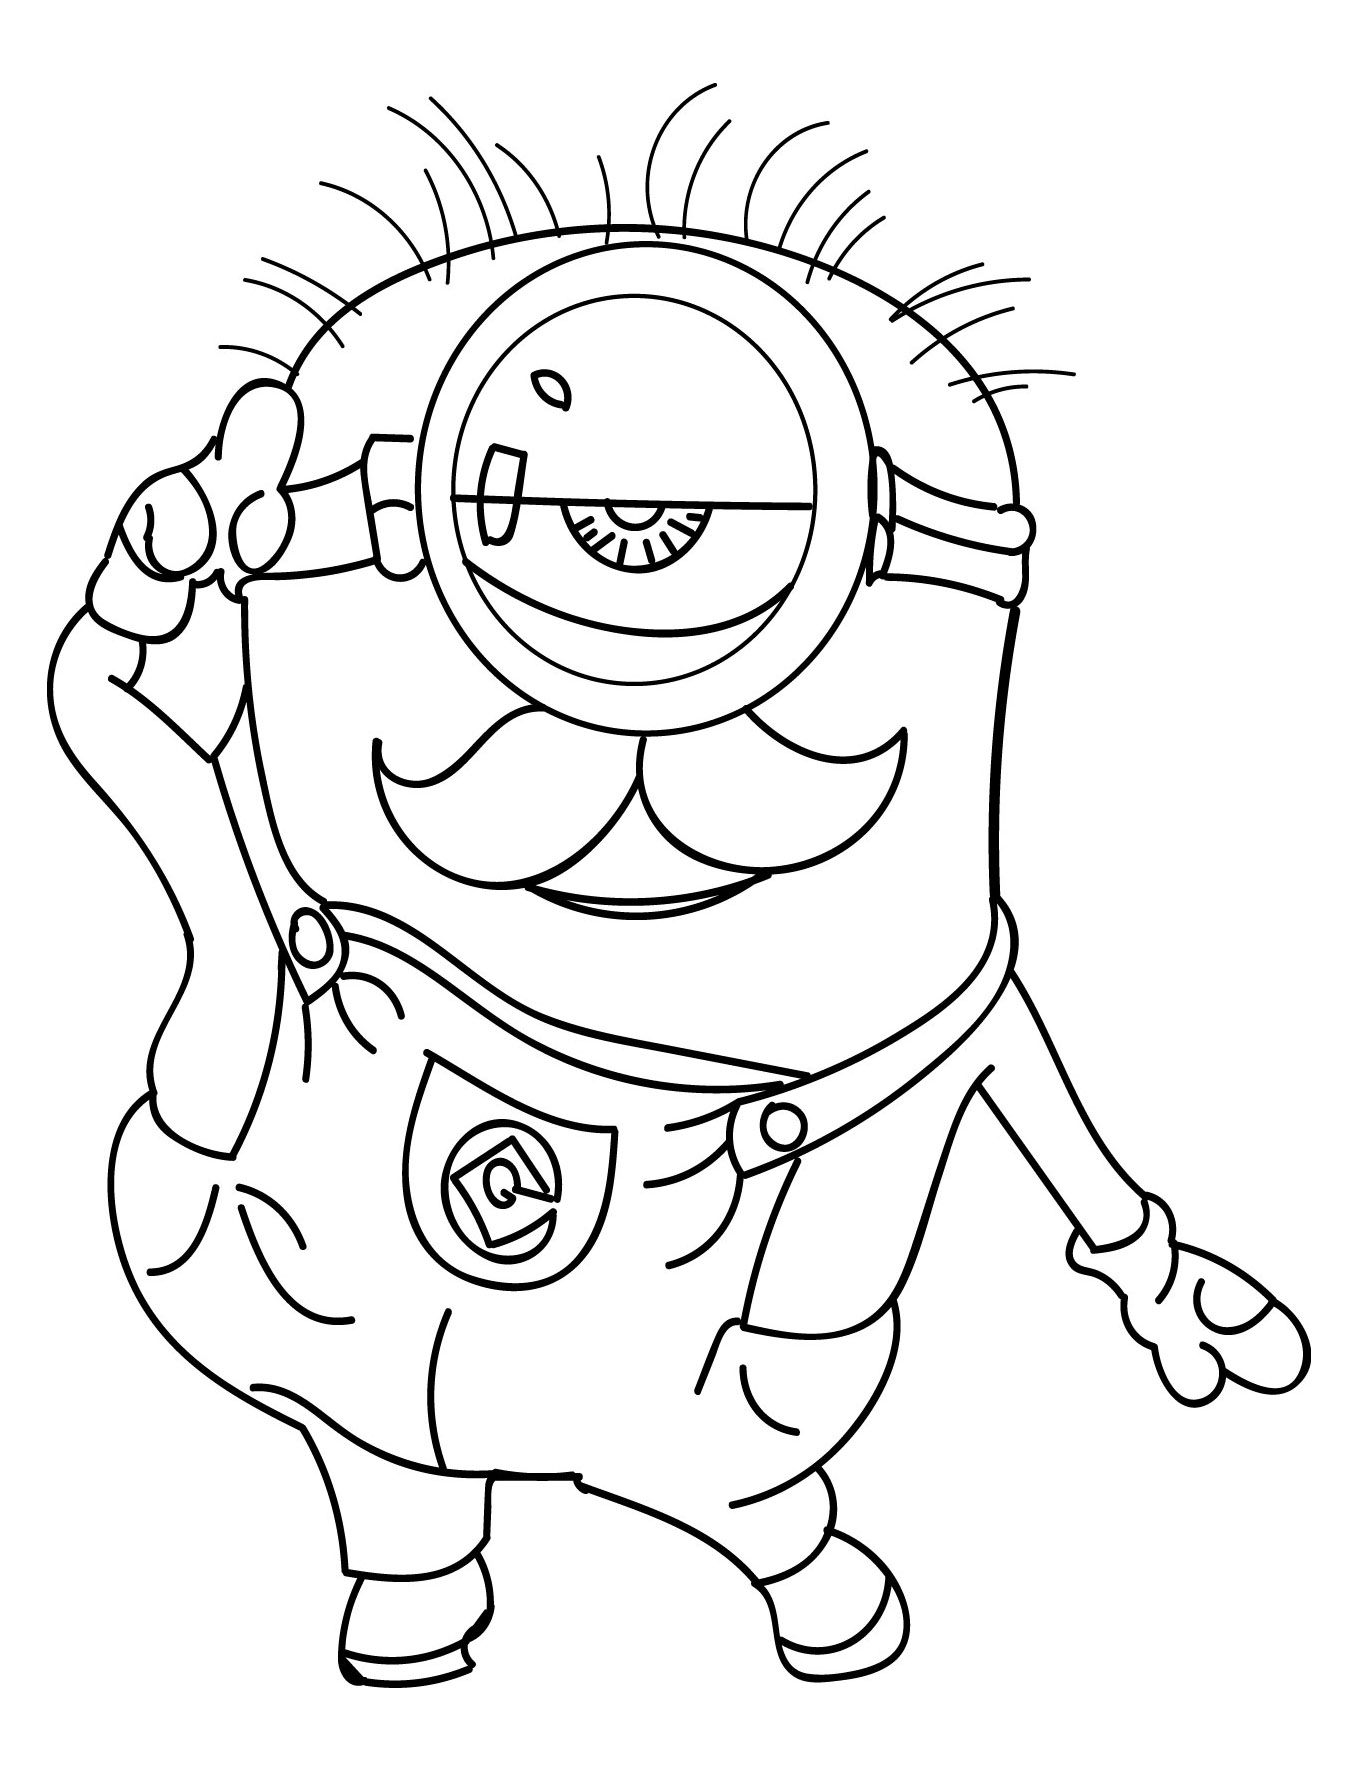 Minions picture to print and color